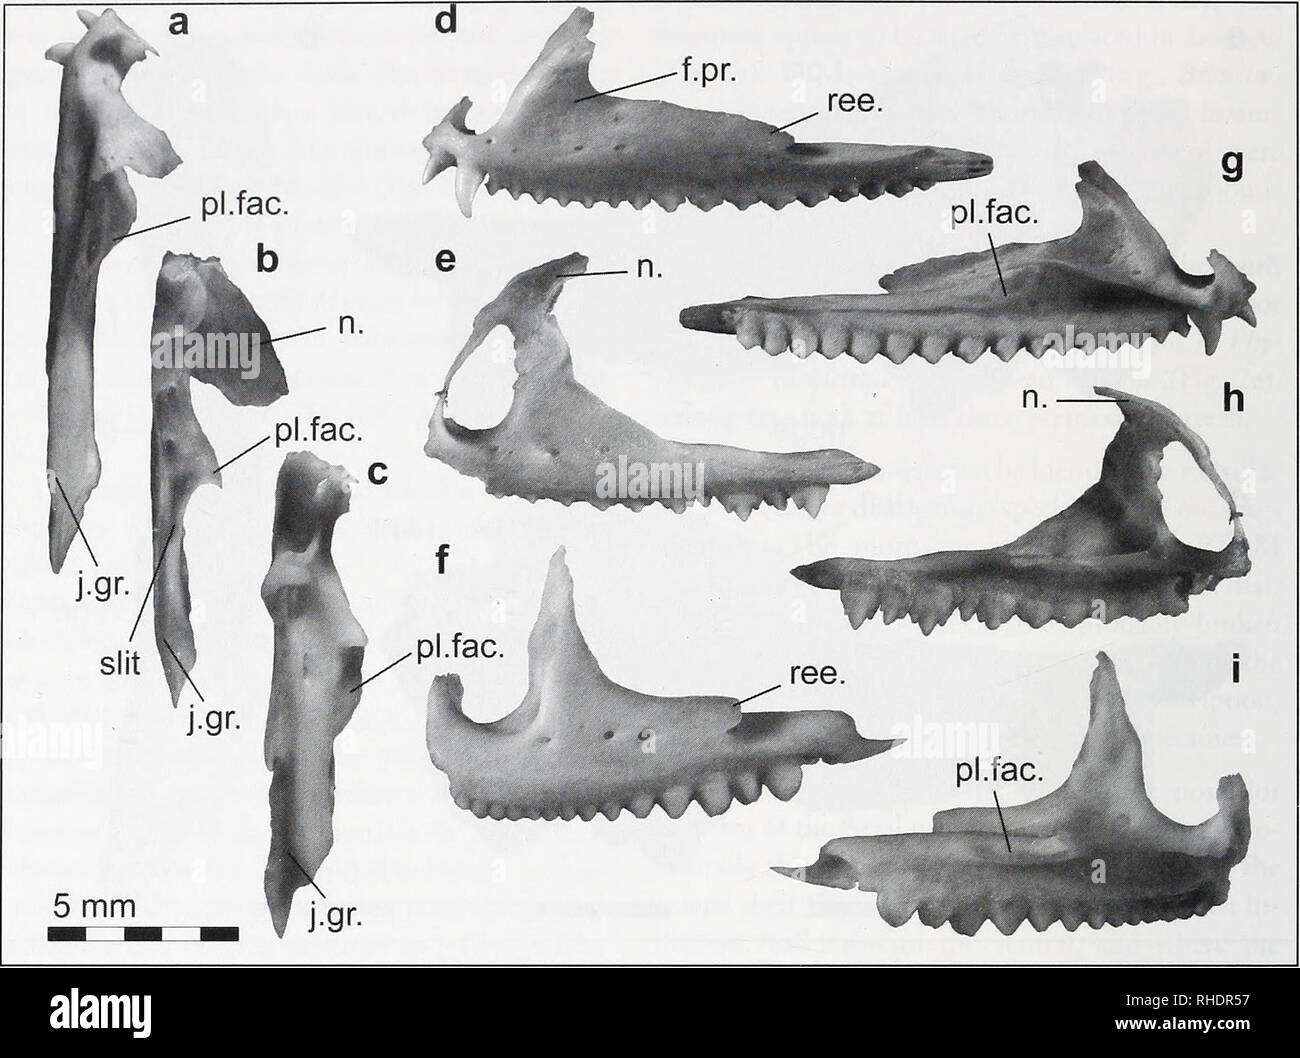 . Bonner zoologische Monographien. Zoology. HOWl R /OOUH,ISC'Hk MONOGRAPHIEN Nr. 57/201!. FIG. 4. Maxillae of select agamids in dorsal (left column), lateral (middle column), and medial (right column) views, (a, d, g) Agama mossambica, UF 55339; (b, e, h) Leiolepis belliana, UF 62048; and (c, f, i) Uromastyx princeps, CM 145044. Abbreviations: f.pr., facial process (posterior remnant); j.gr., jugal groove; pl.pr., pala- tine process; ree, maxillary reentrant on the jugal. Bell et al. 2009). It is unclear whether this feature is autapomorphic of Agamidae* and lost in Leiolepis, or whether the s Stock Photo